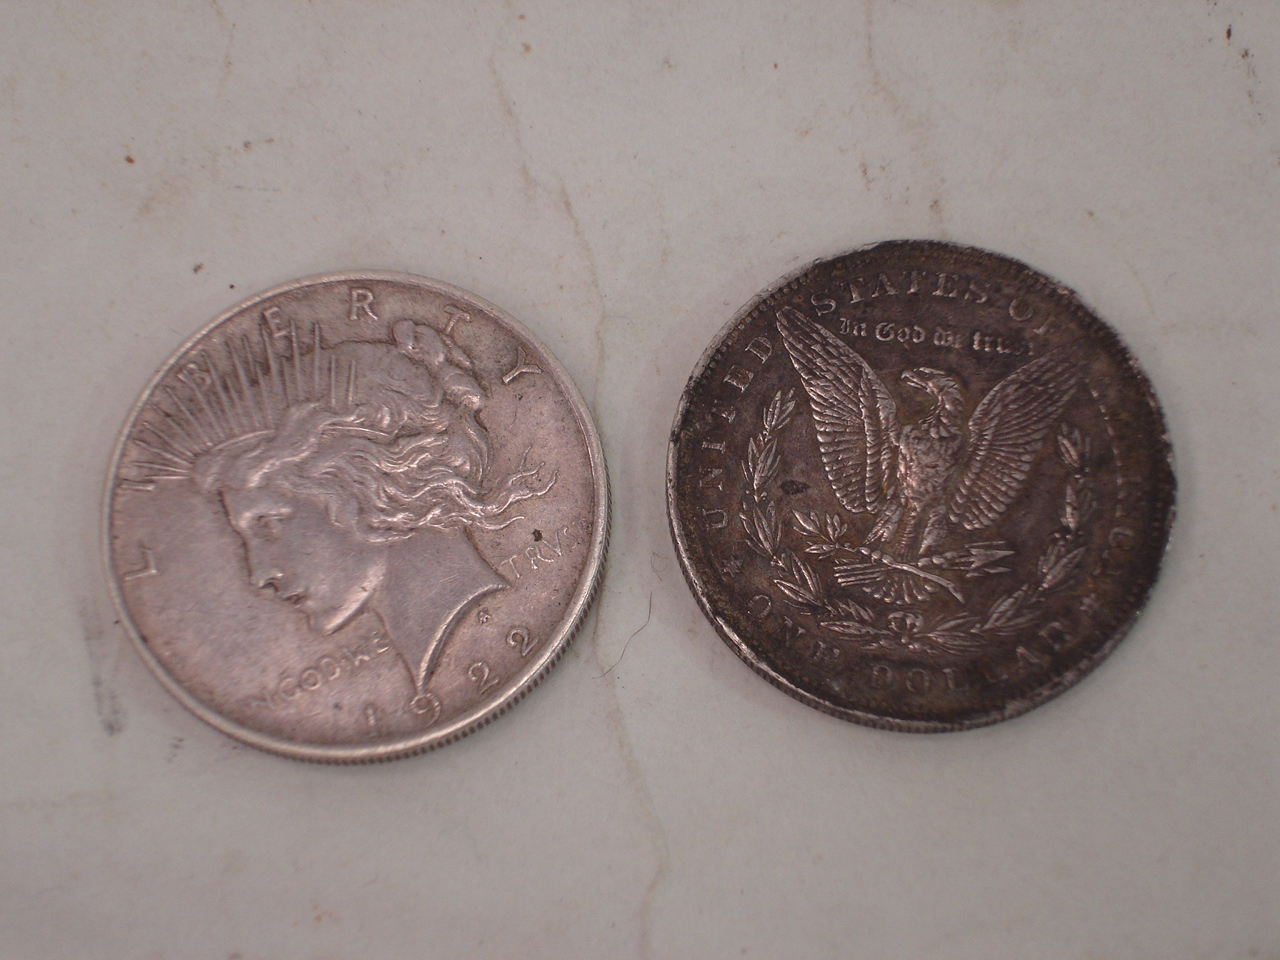 Two U.S Dollar coins, 1896 and 1922